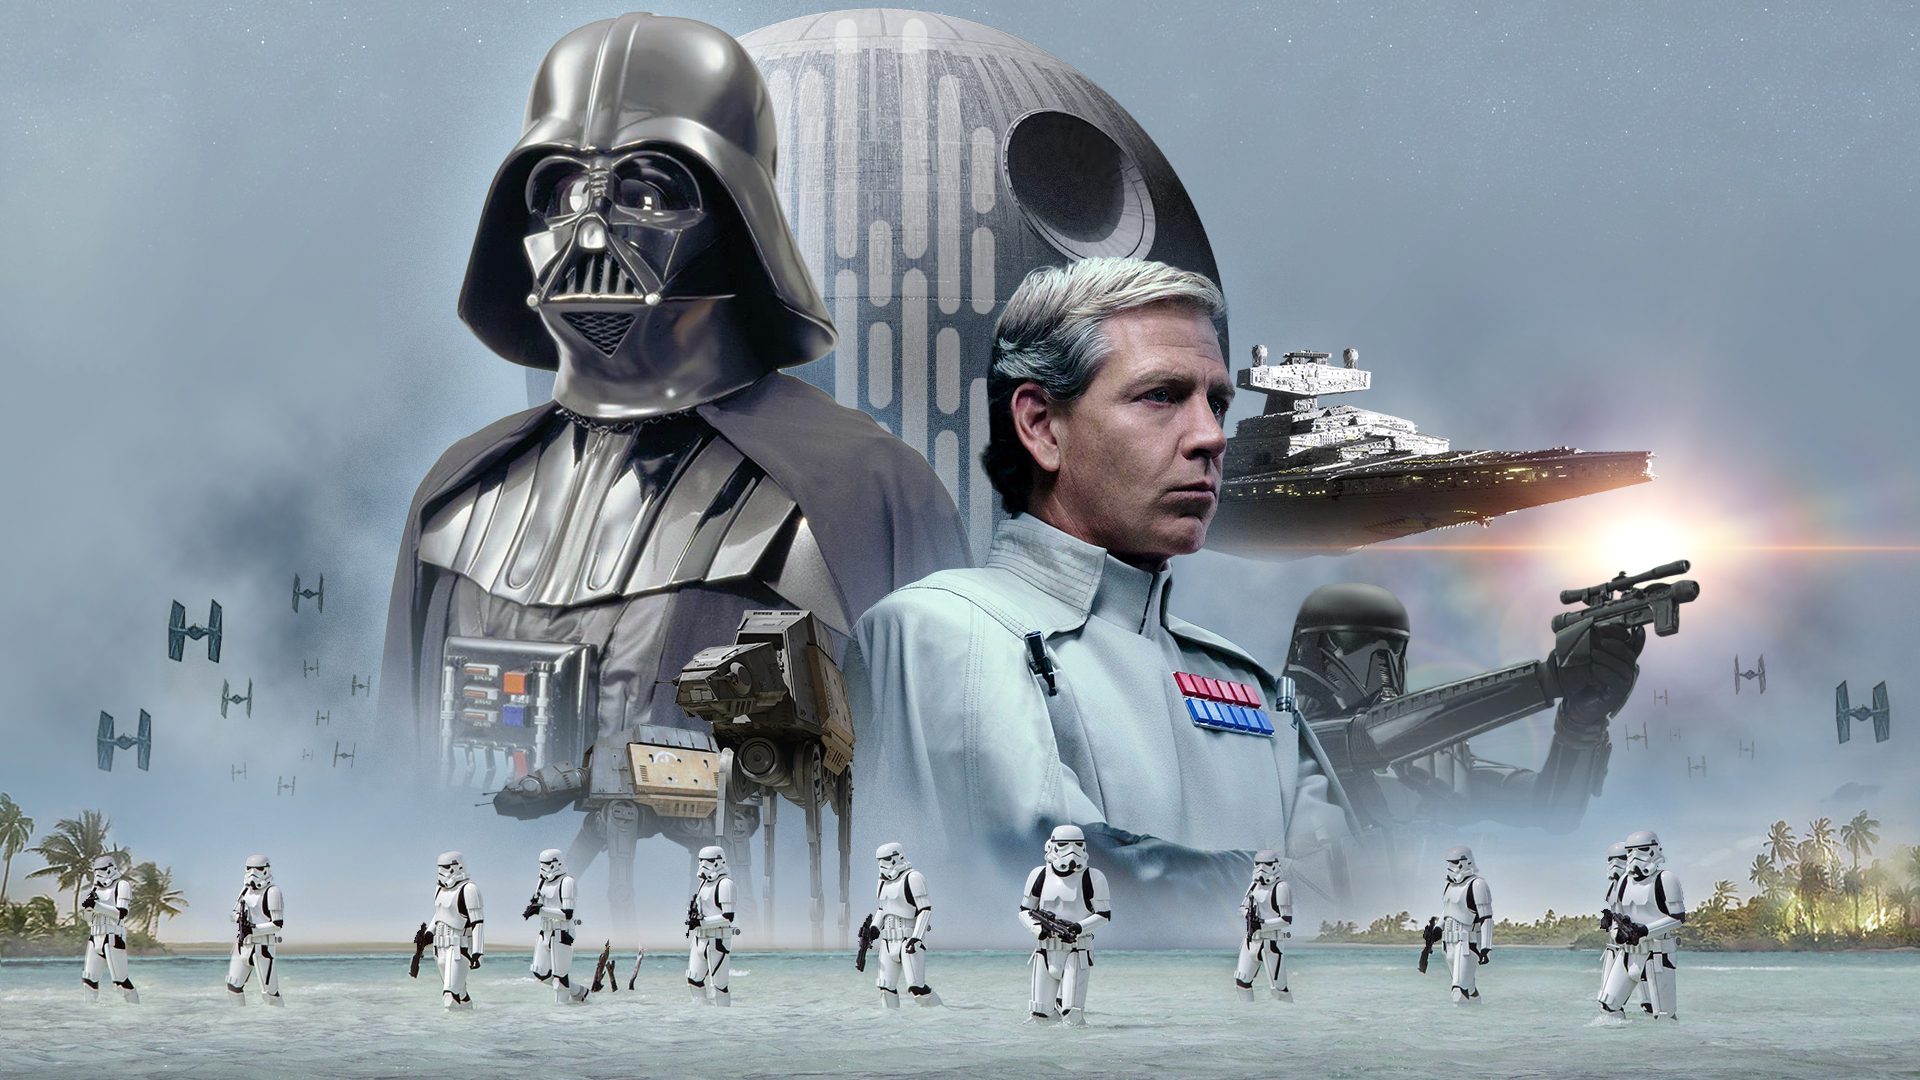 1920x1080 Rogue One Wallpaper Factory Sale, 53% OFF